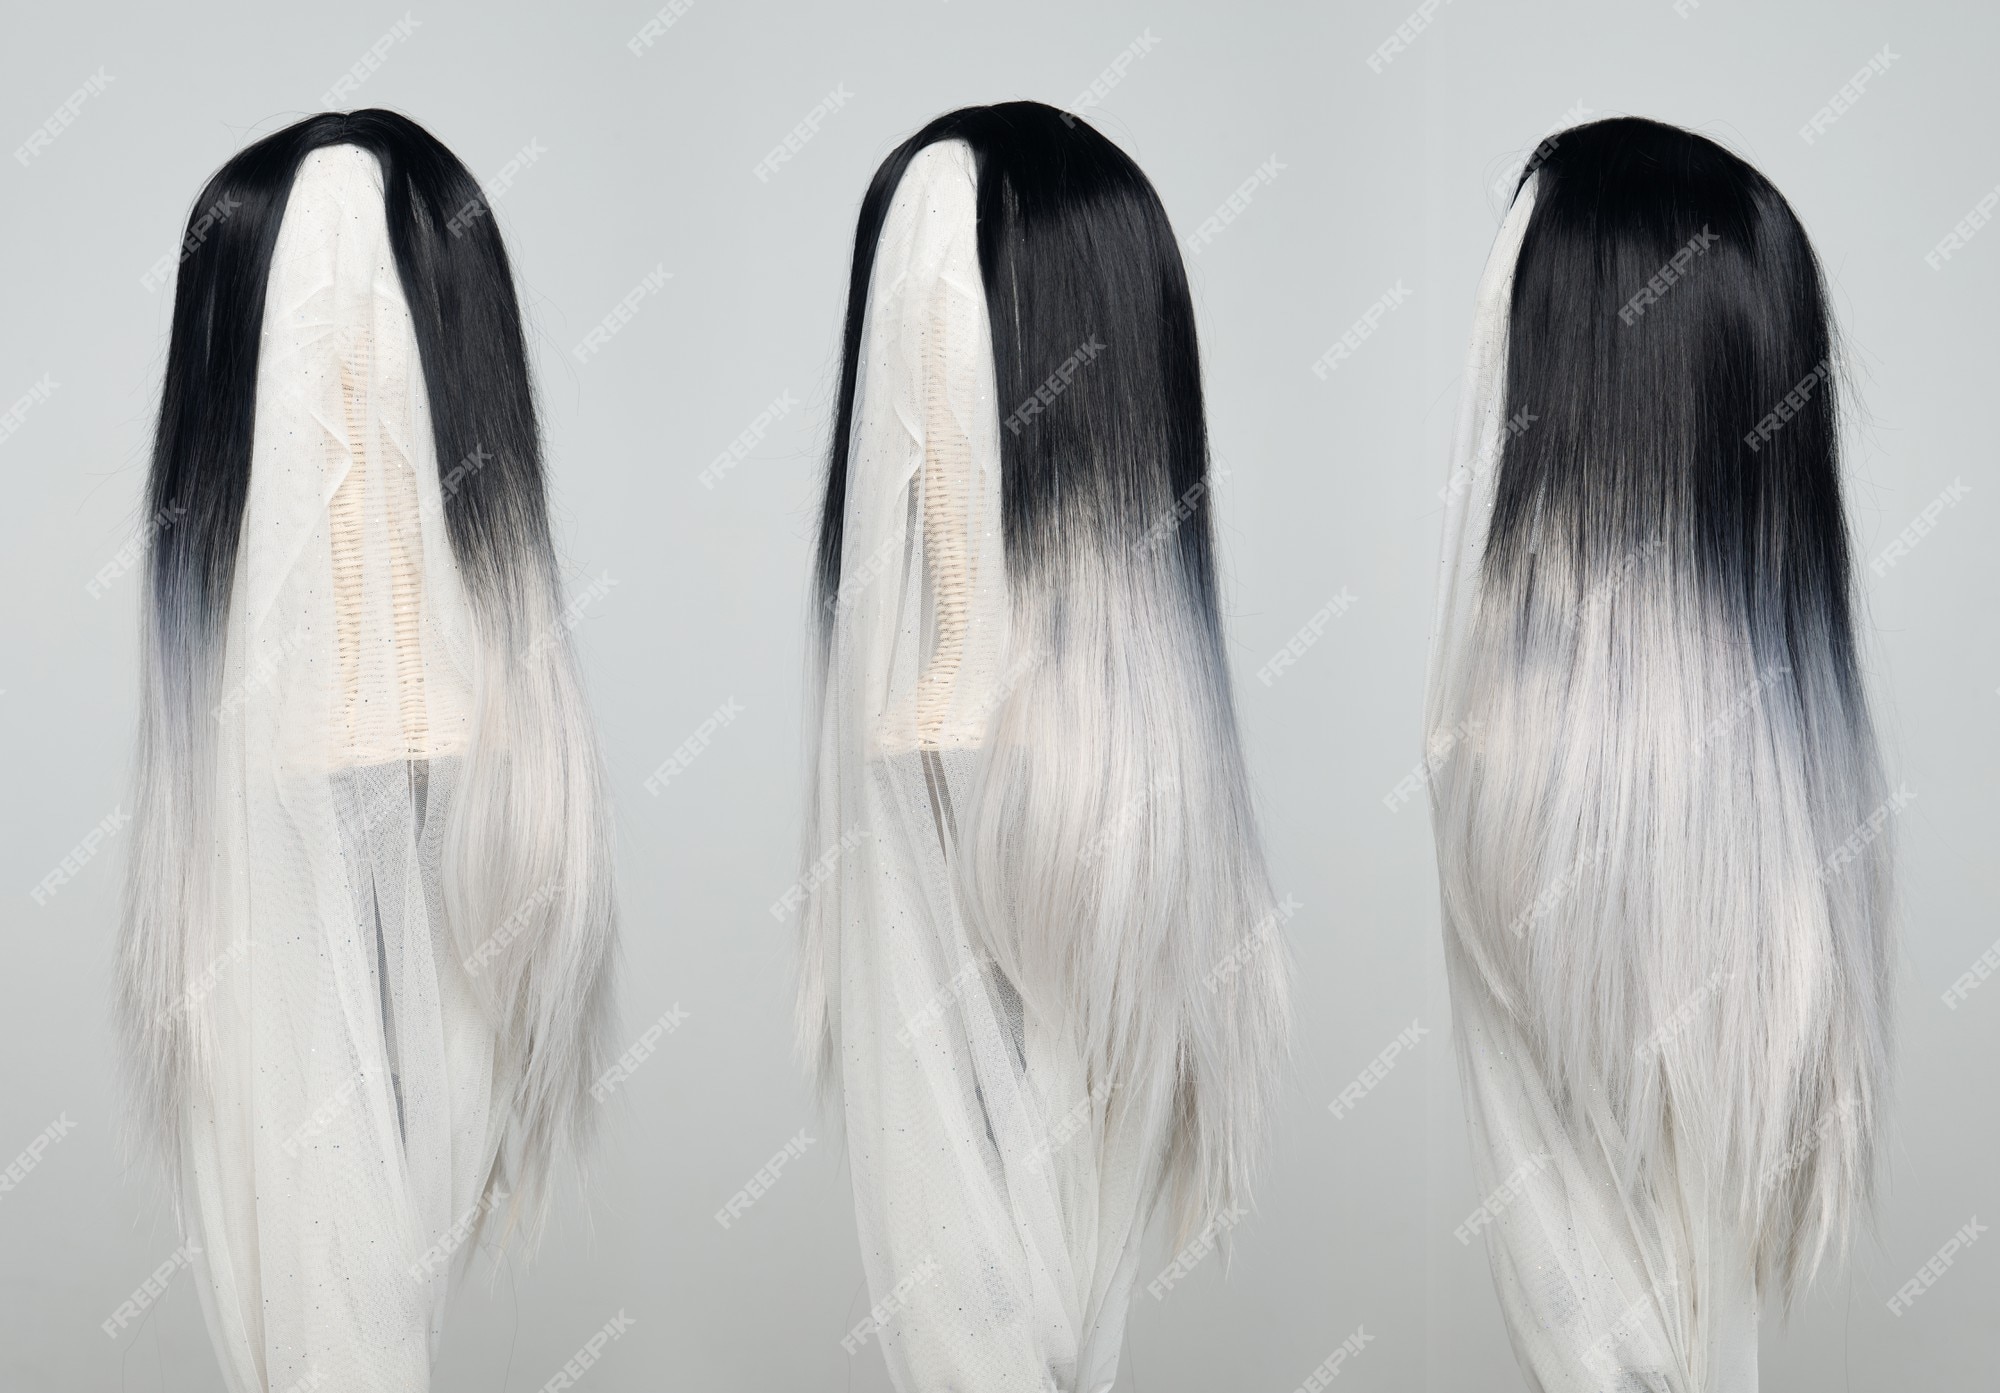 Premium Photo | Black top straight long hair white bottom part wig on  mannequin head over gray background isolated, set of three to show many  angle of hair style wave and light point of view